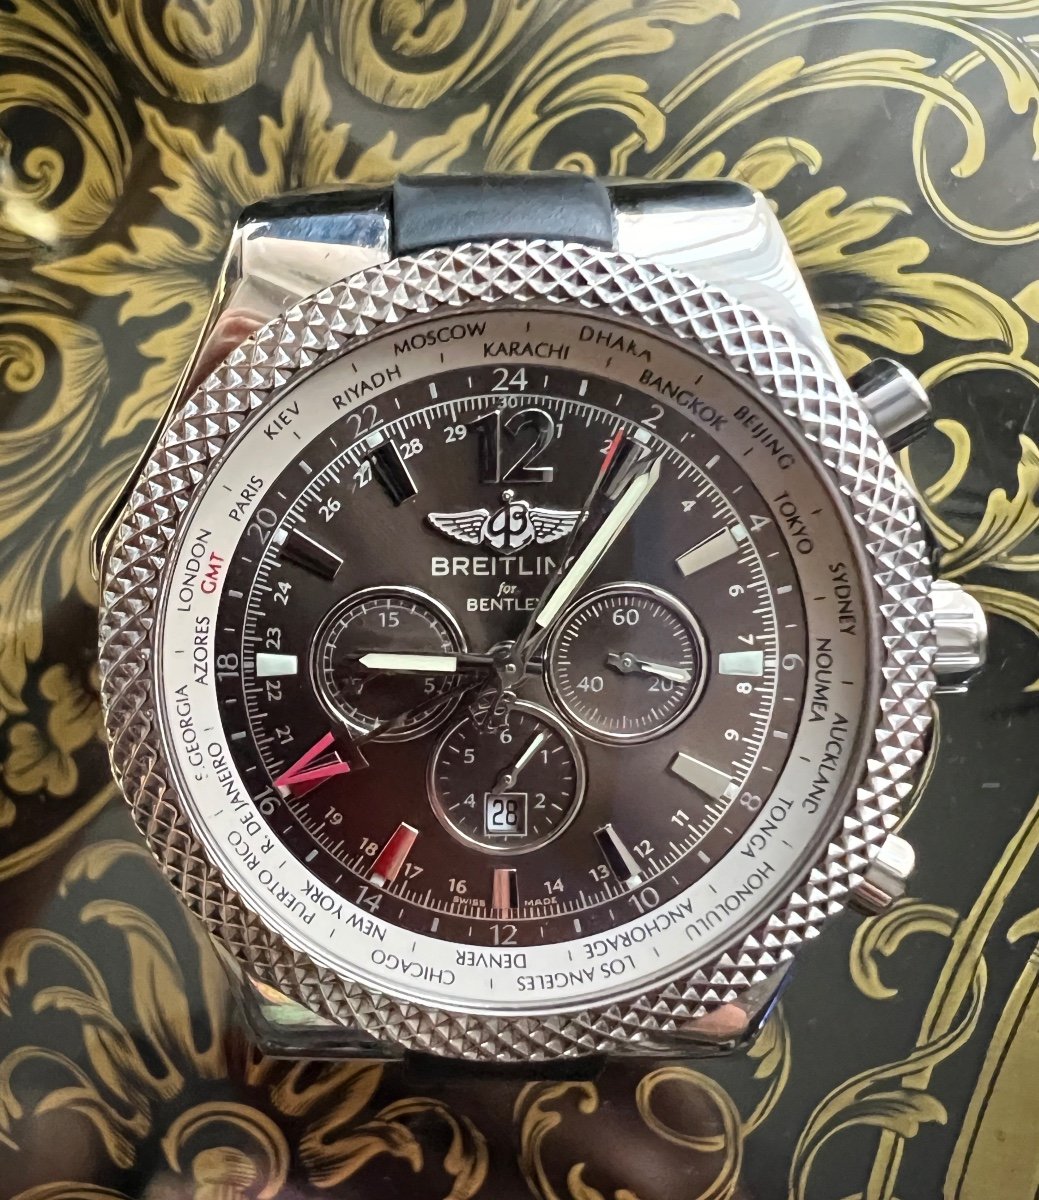 Breitling A47362 Condition Is Ideal Box + Documents Two Bracelets In Metal And Rubber The Servi